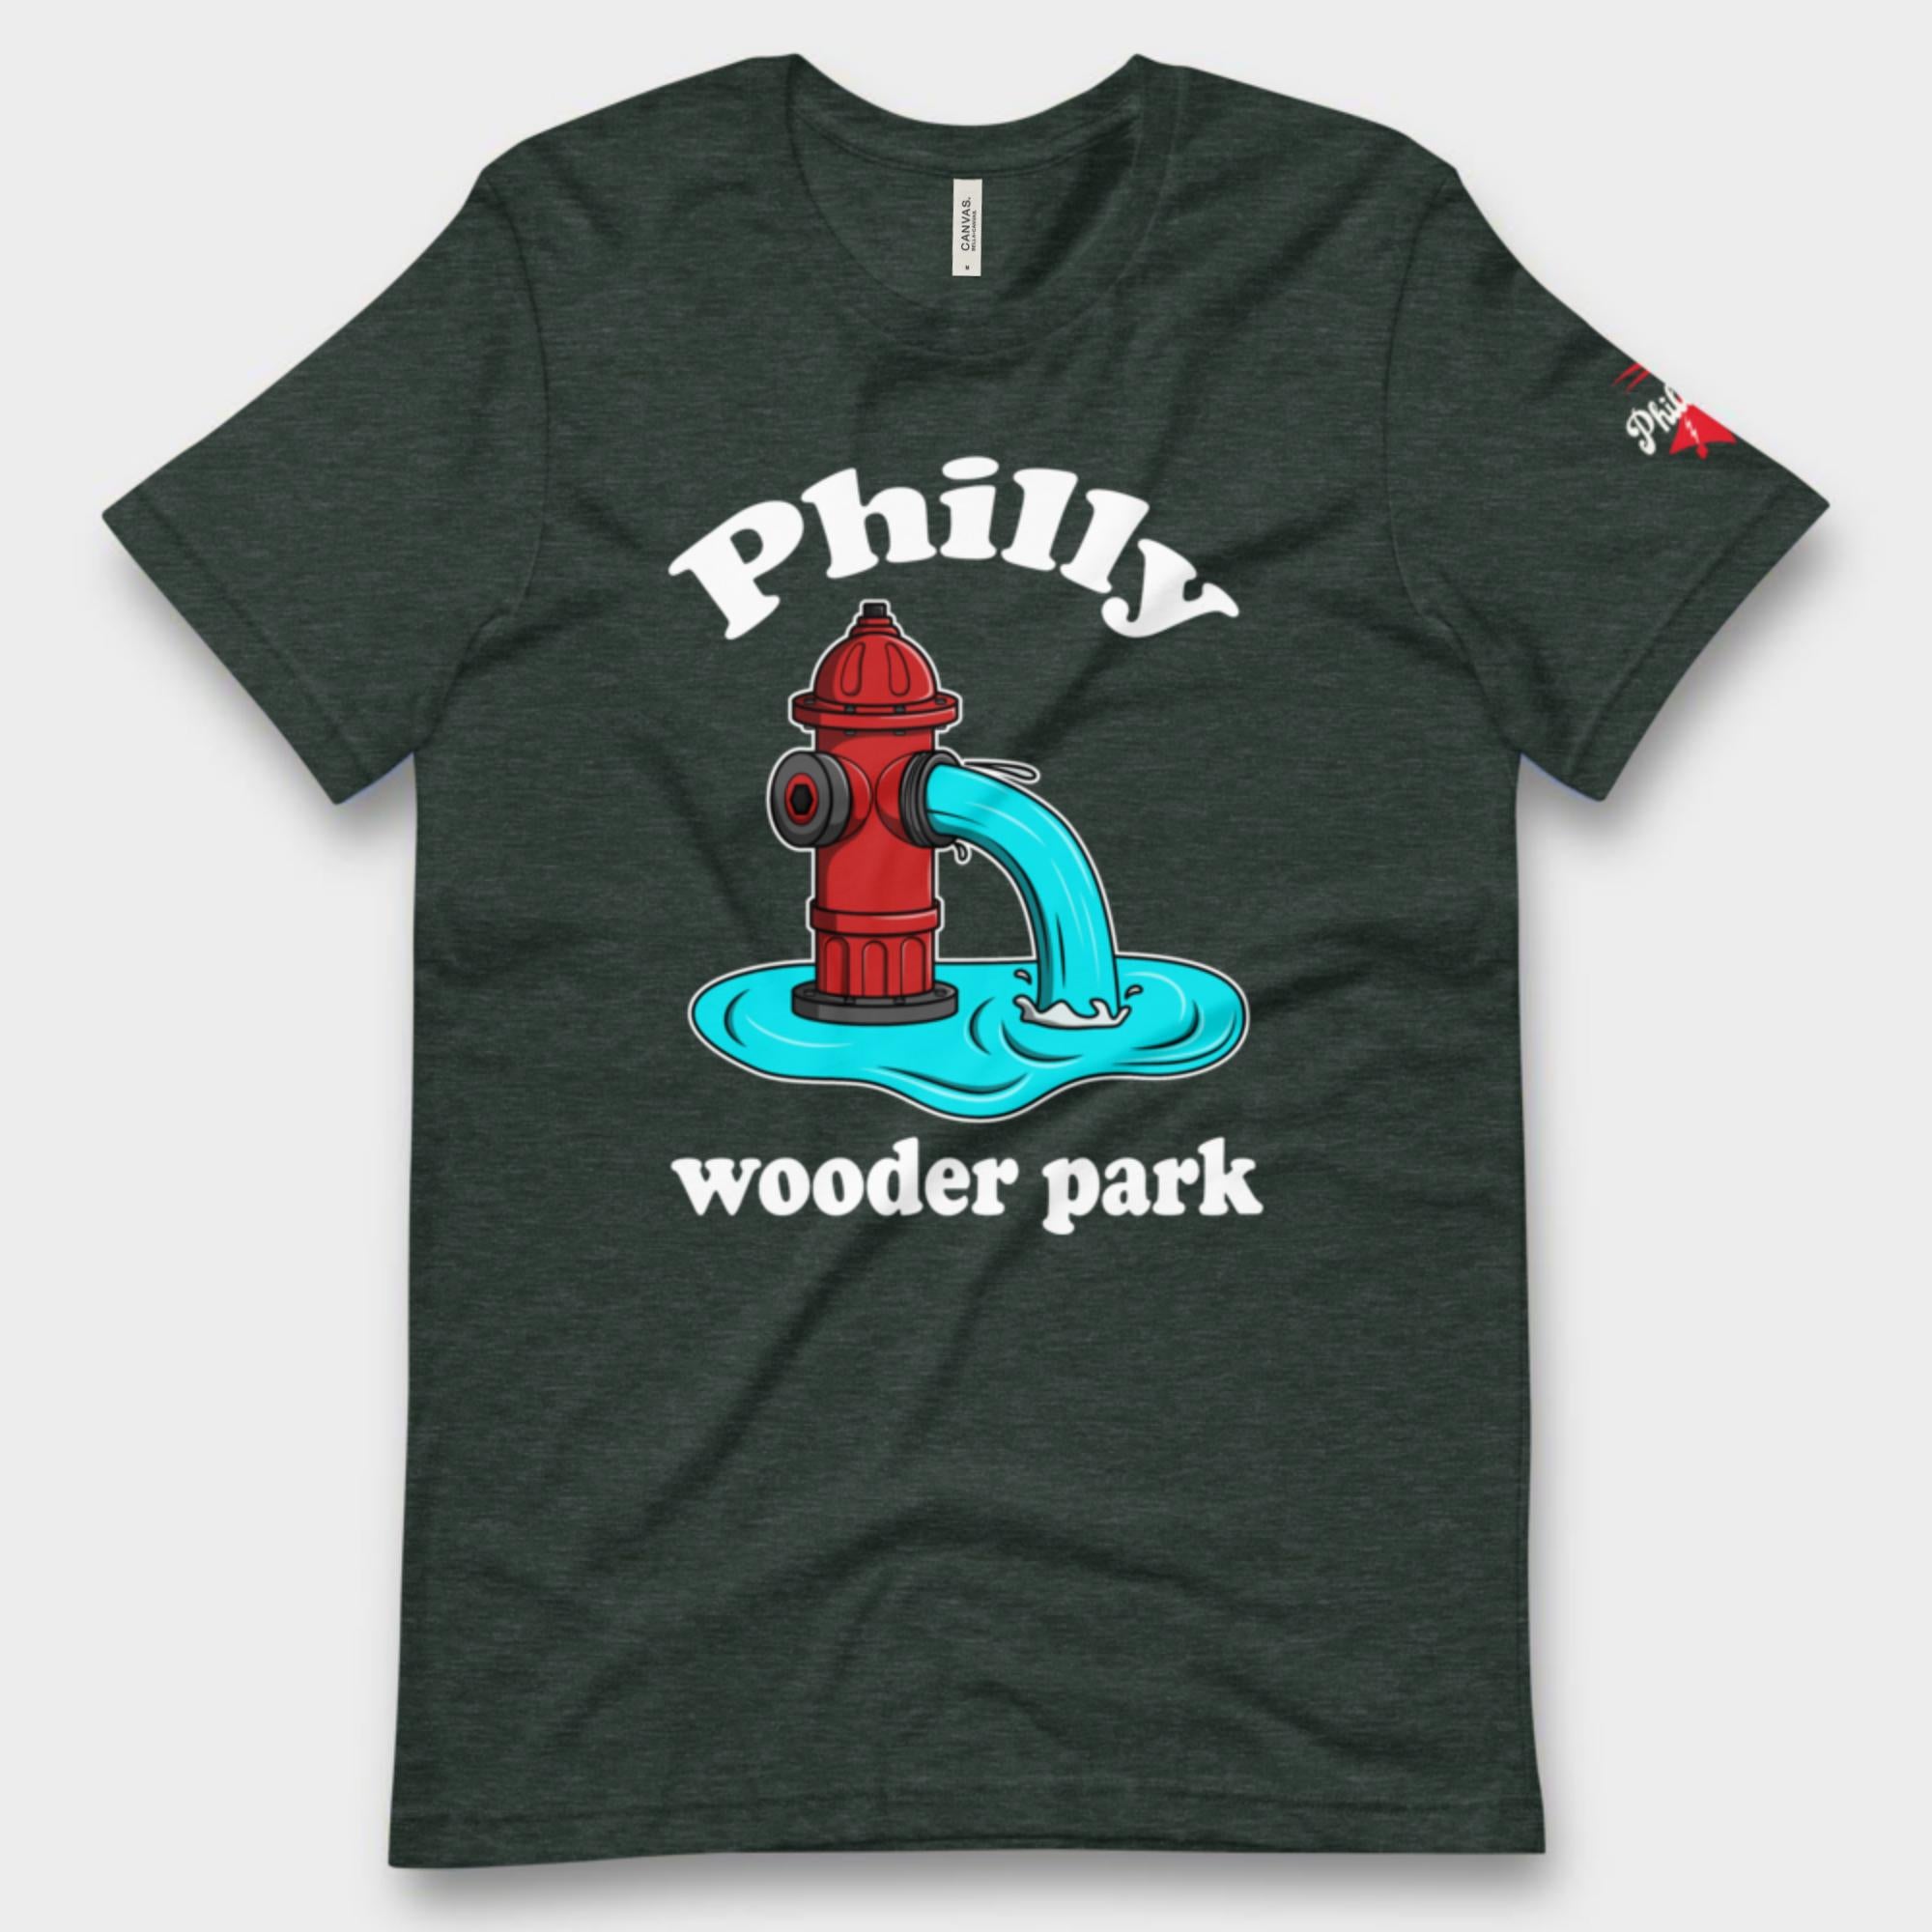 "Philly Wooder Park" Tee